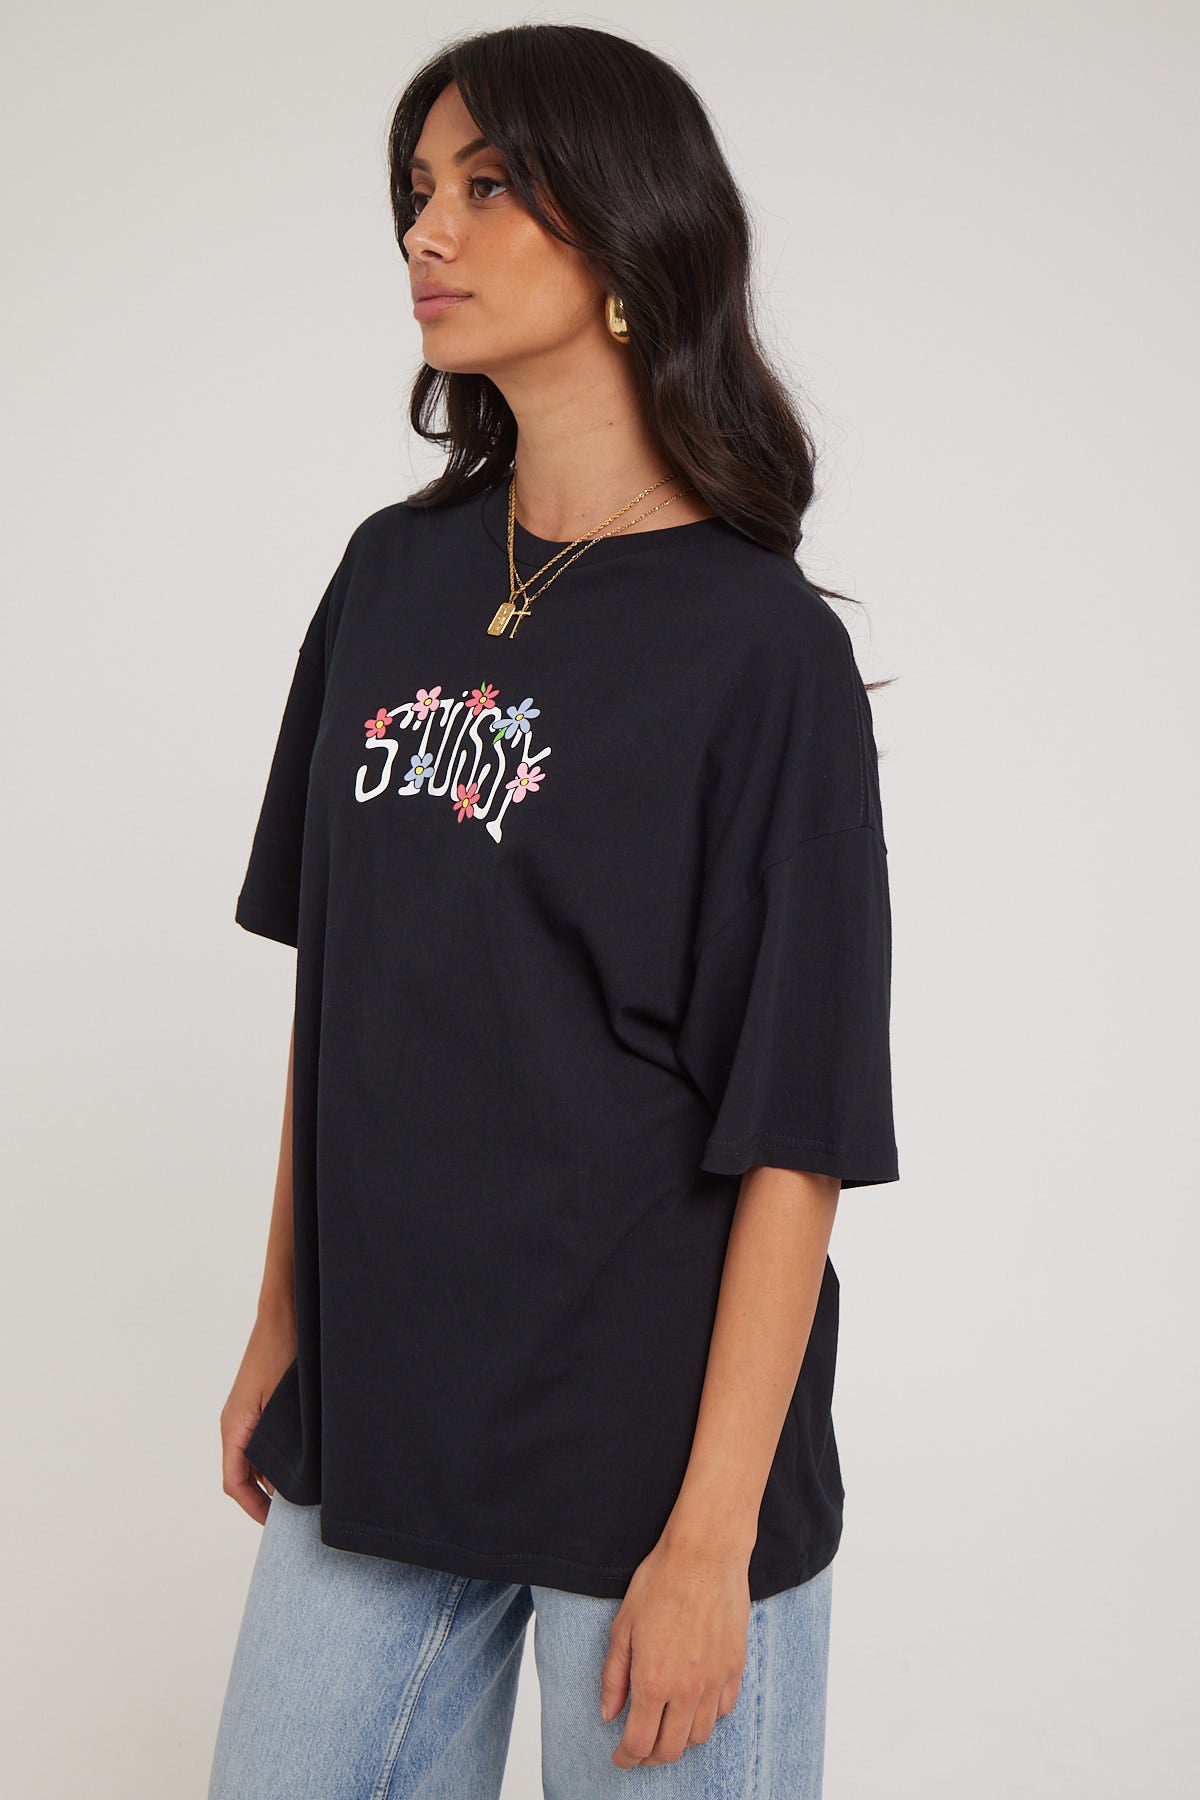 Stussy Flower Chain Relaxed Tee Black